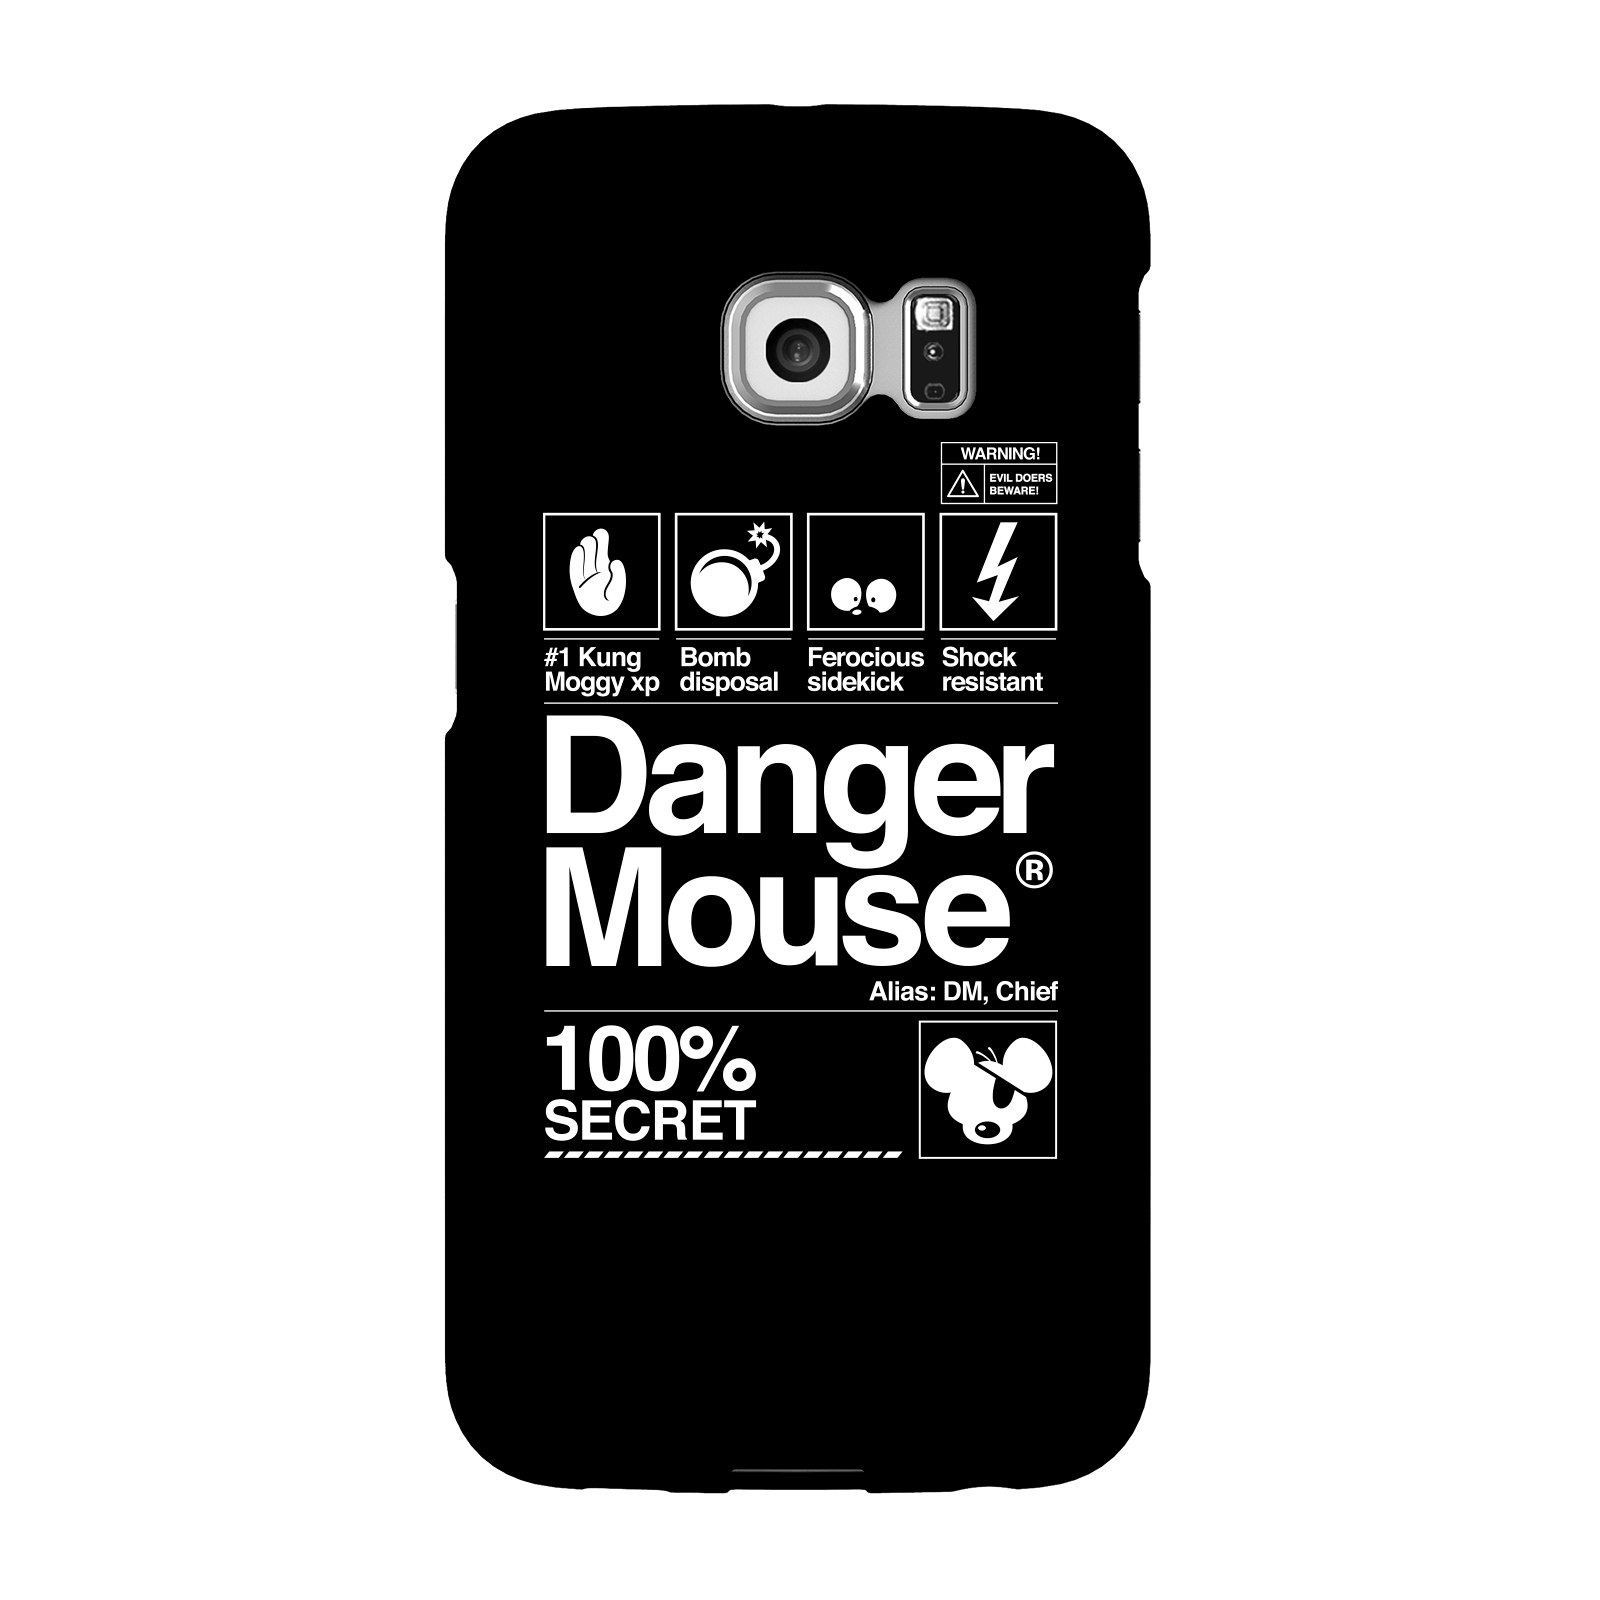 Danger Mouse 100% Secret Phone Case for iPhone and Android - Samsung S6 Edge Plus - Snap Case - Matte